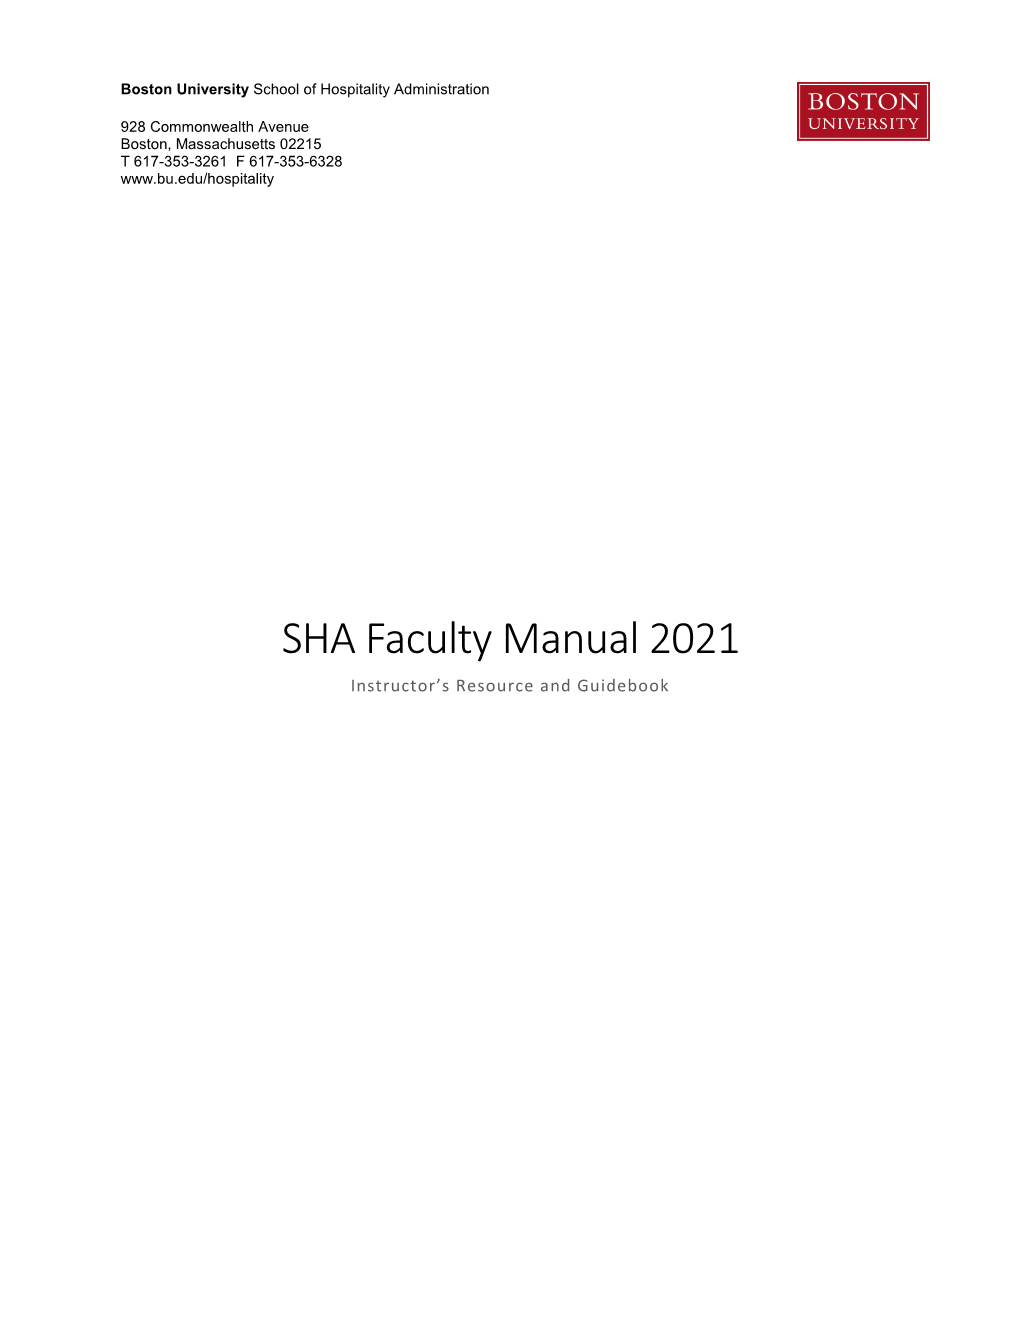 SHA Faculty Manual 2021 Instructor’S Resource and Guidebook